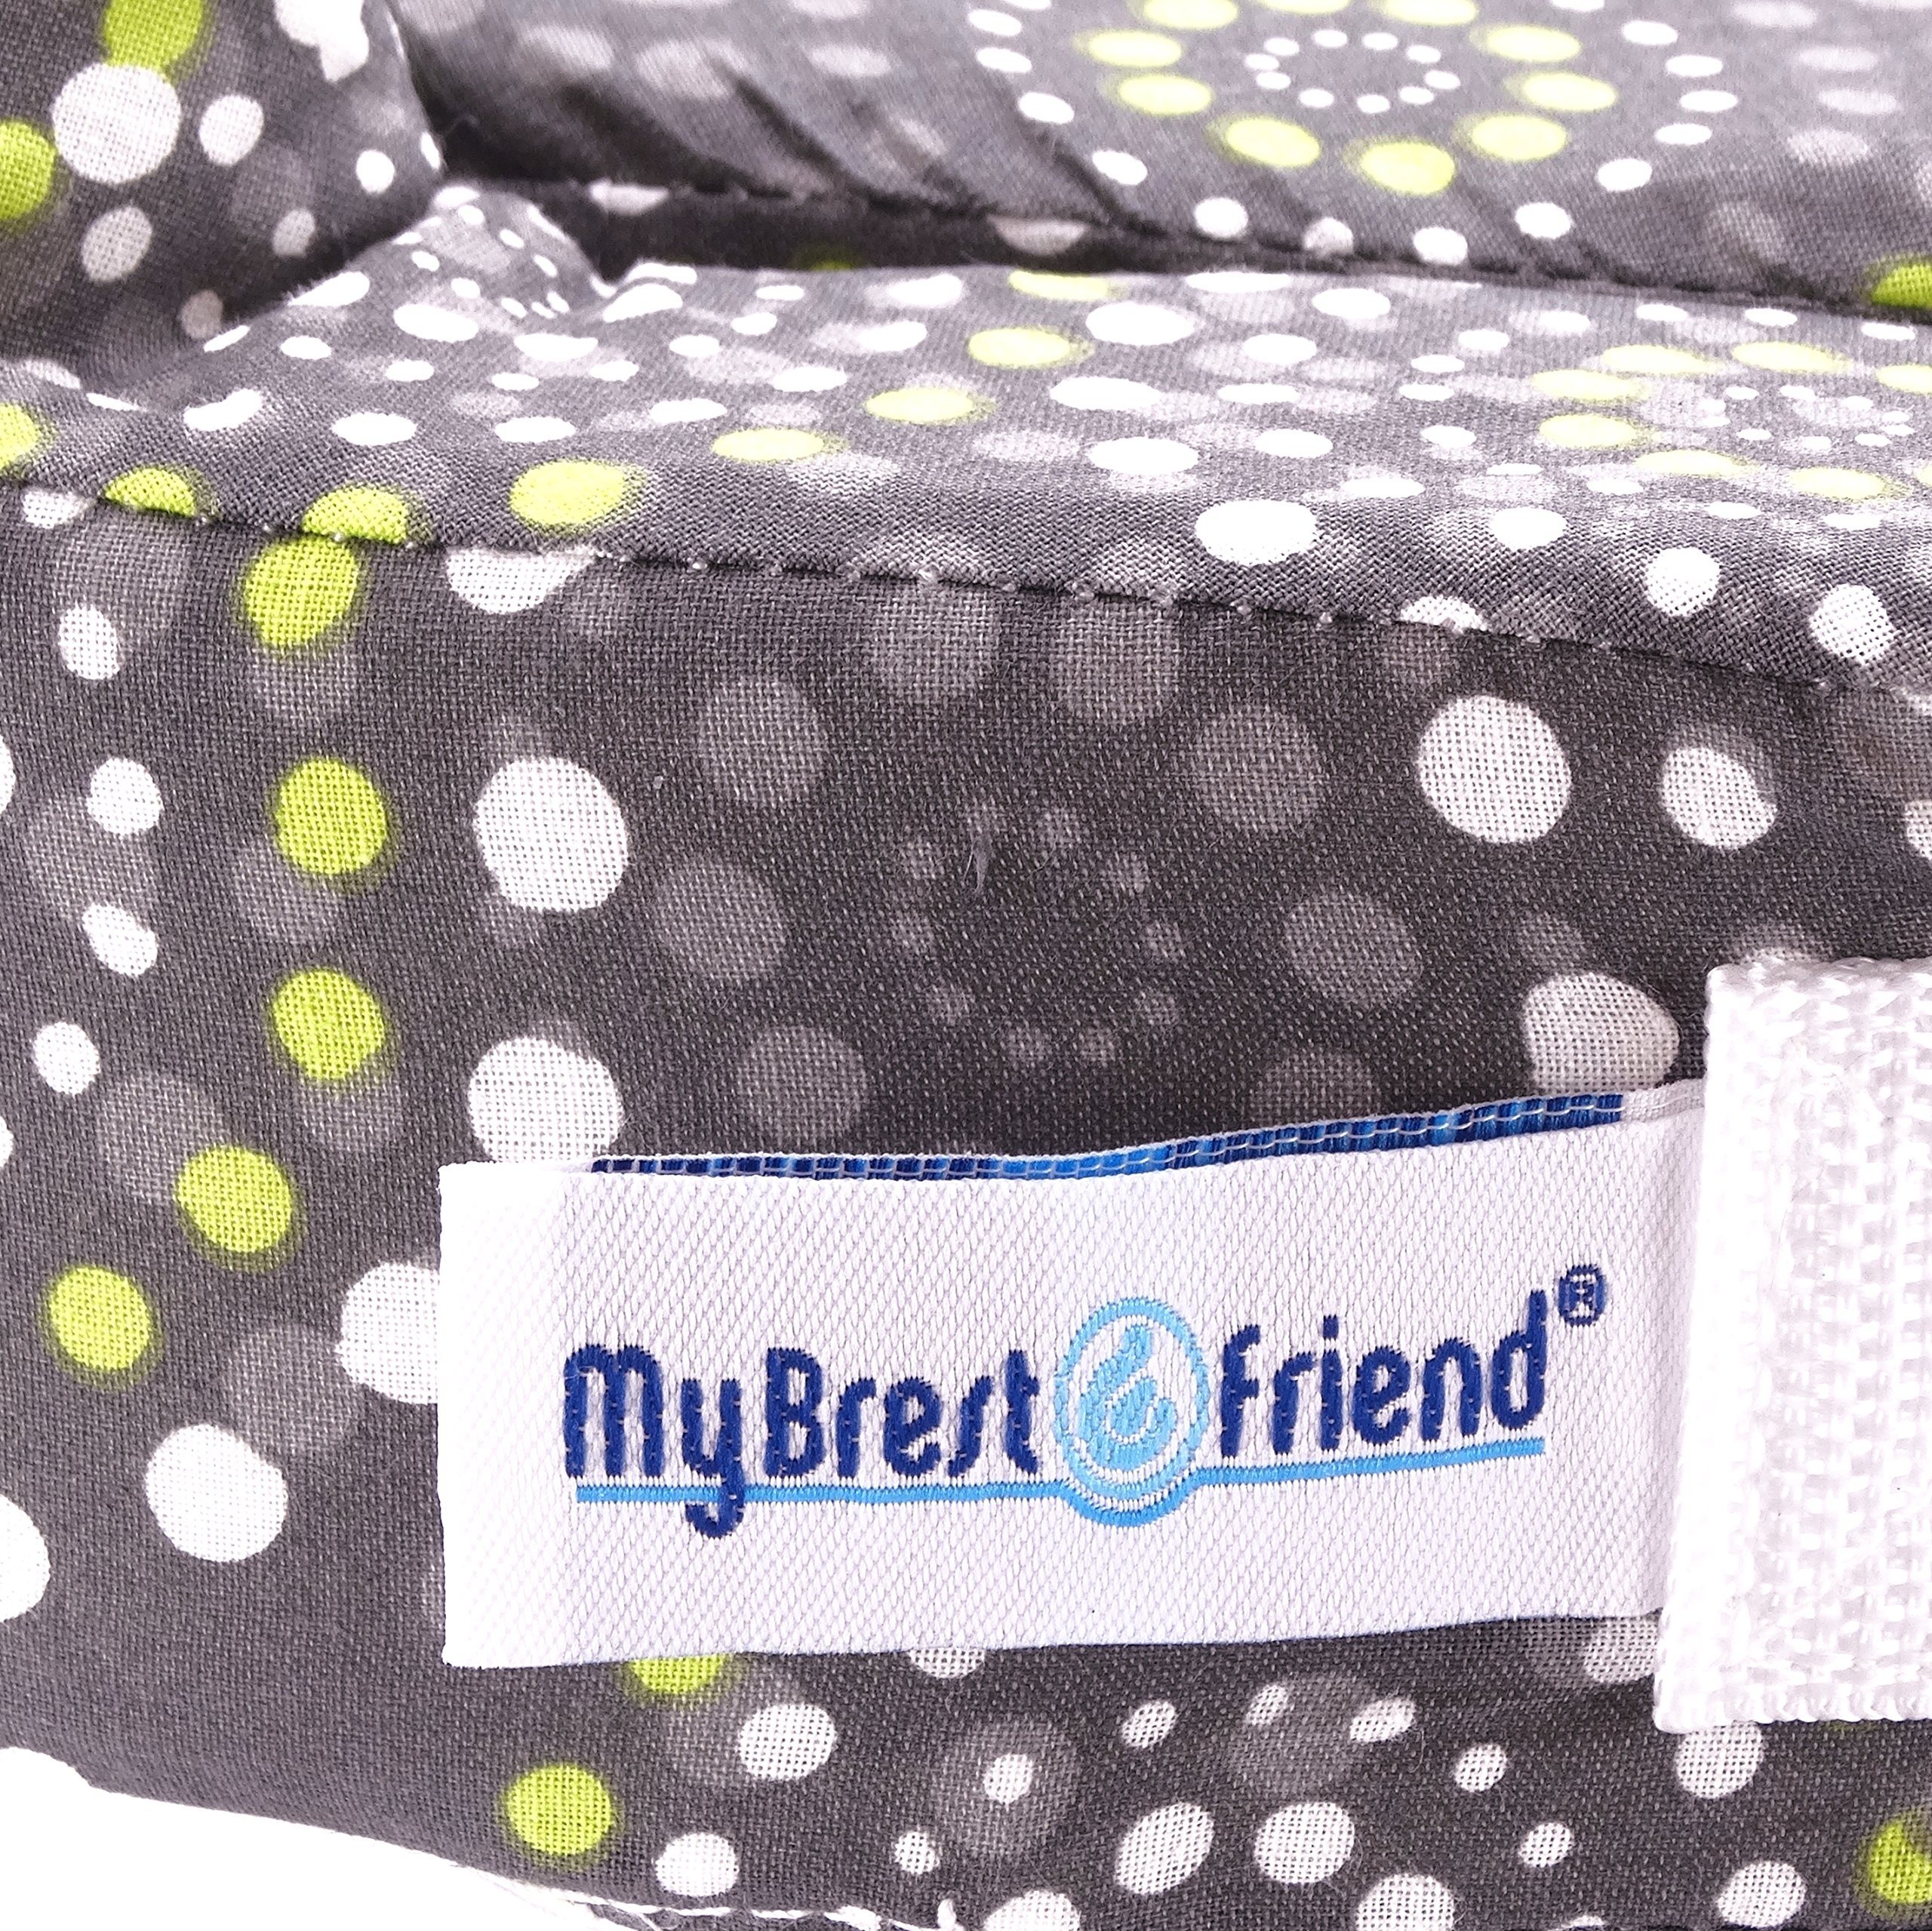 My Brest Friend Original Nursing Pillow for Breastfeeding, Nursing and Posture Support with Pocket and Removable Slipcover, Grey, Yellow Fireworks